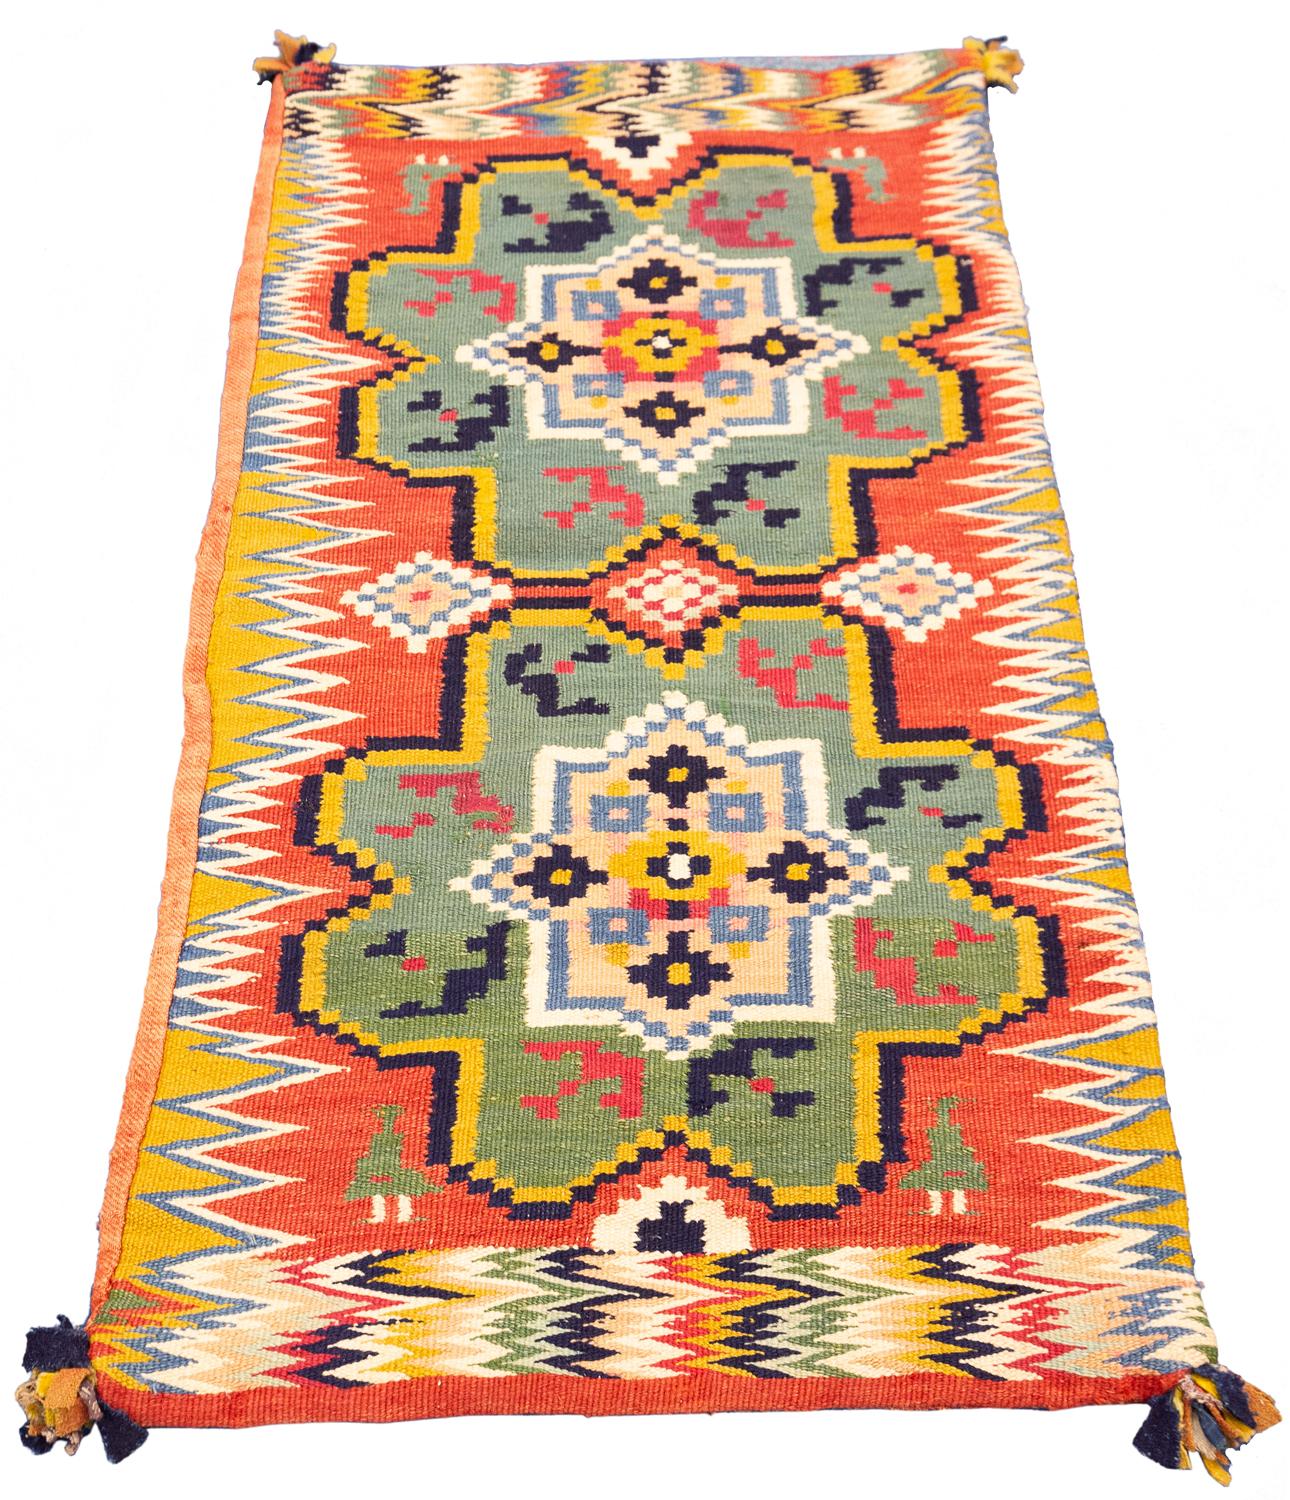 This is a Vintage Swedish Textile woven during the early of the 19th century and measures 93 X 50 CM. It features a vibrant and exciting design. Moreover, it uses an incredible range of colors that make this textile a perfect fit for modern or